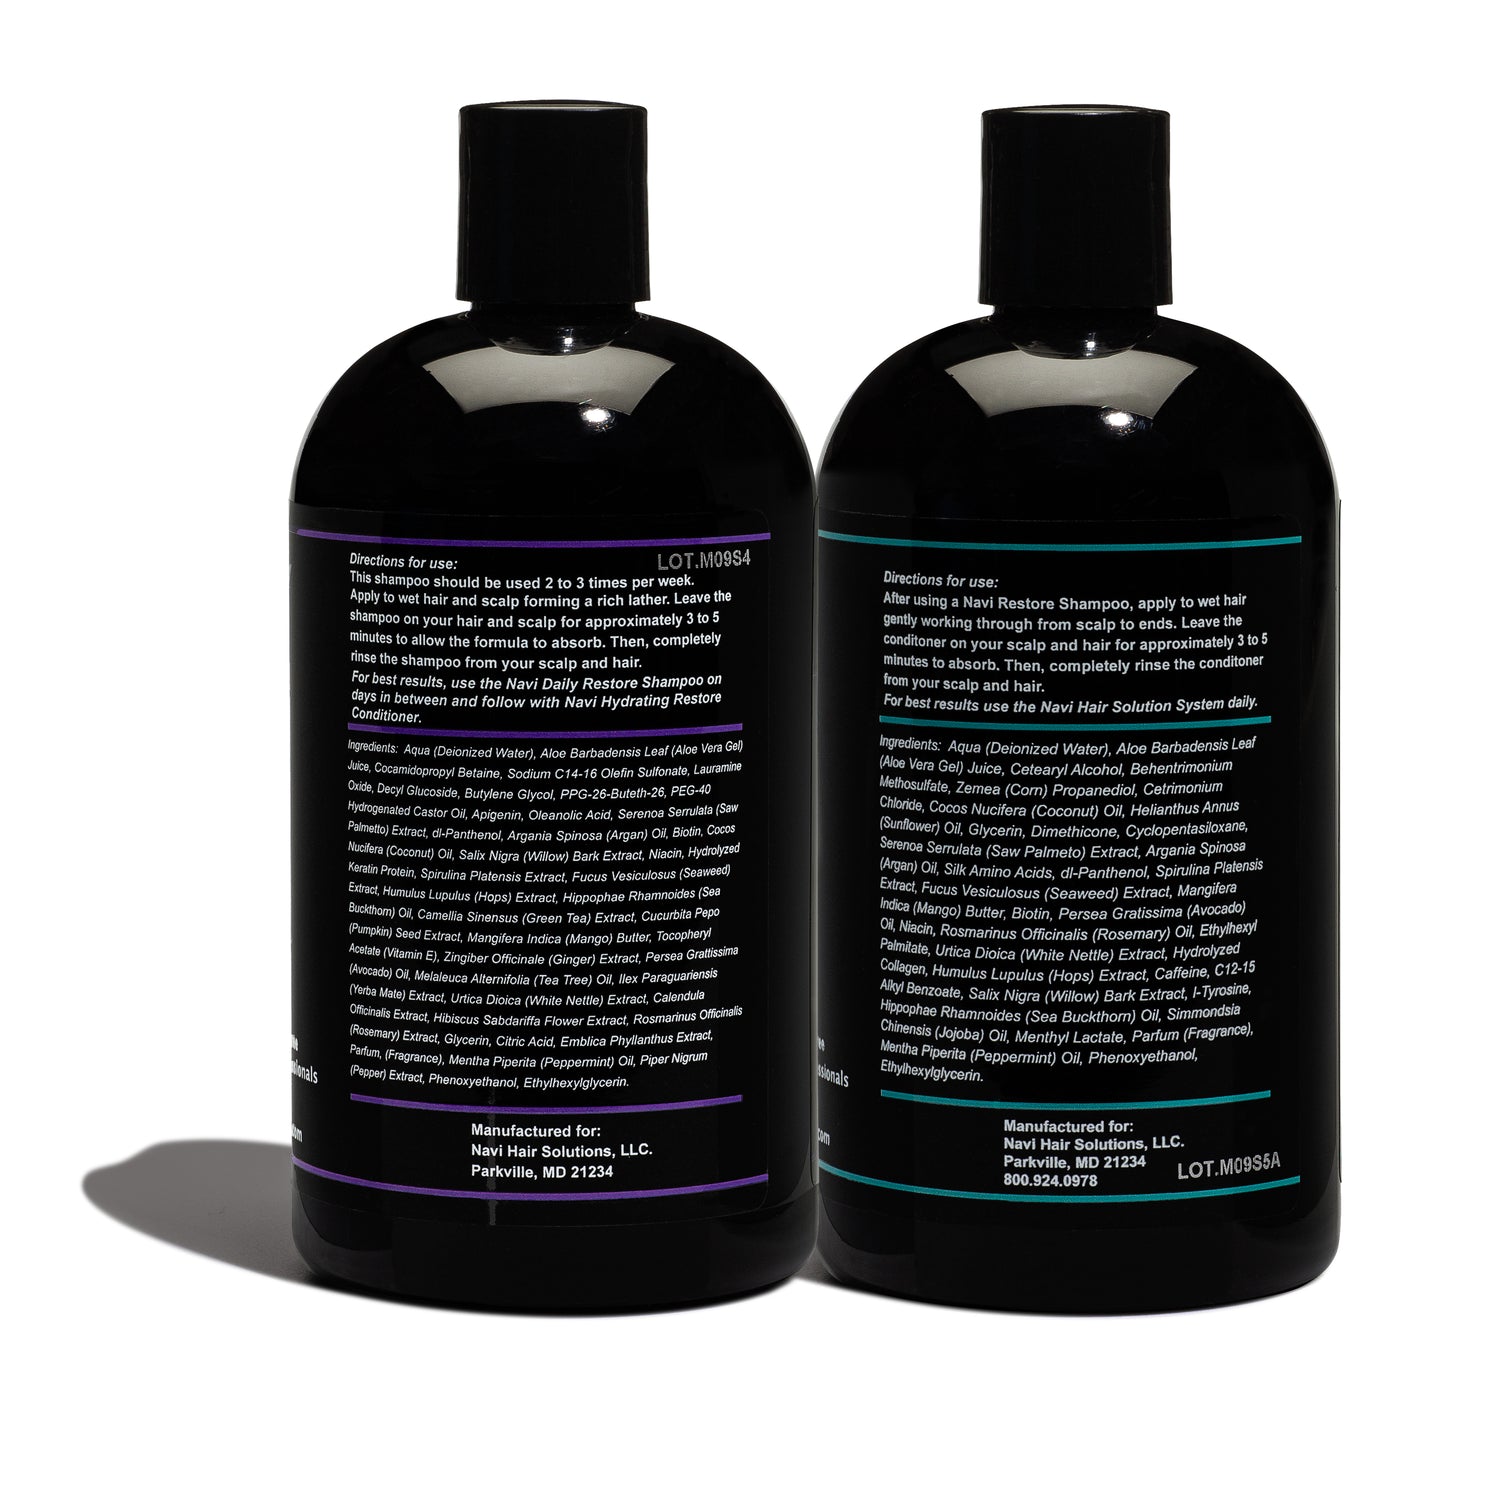 Navi Professional Strength Shampoo & Conditioner Set with DHT blocking ingredients known to help regrow thicker fuller healthier hair